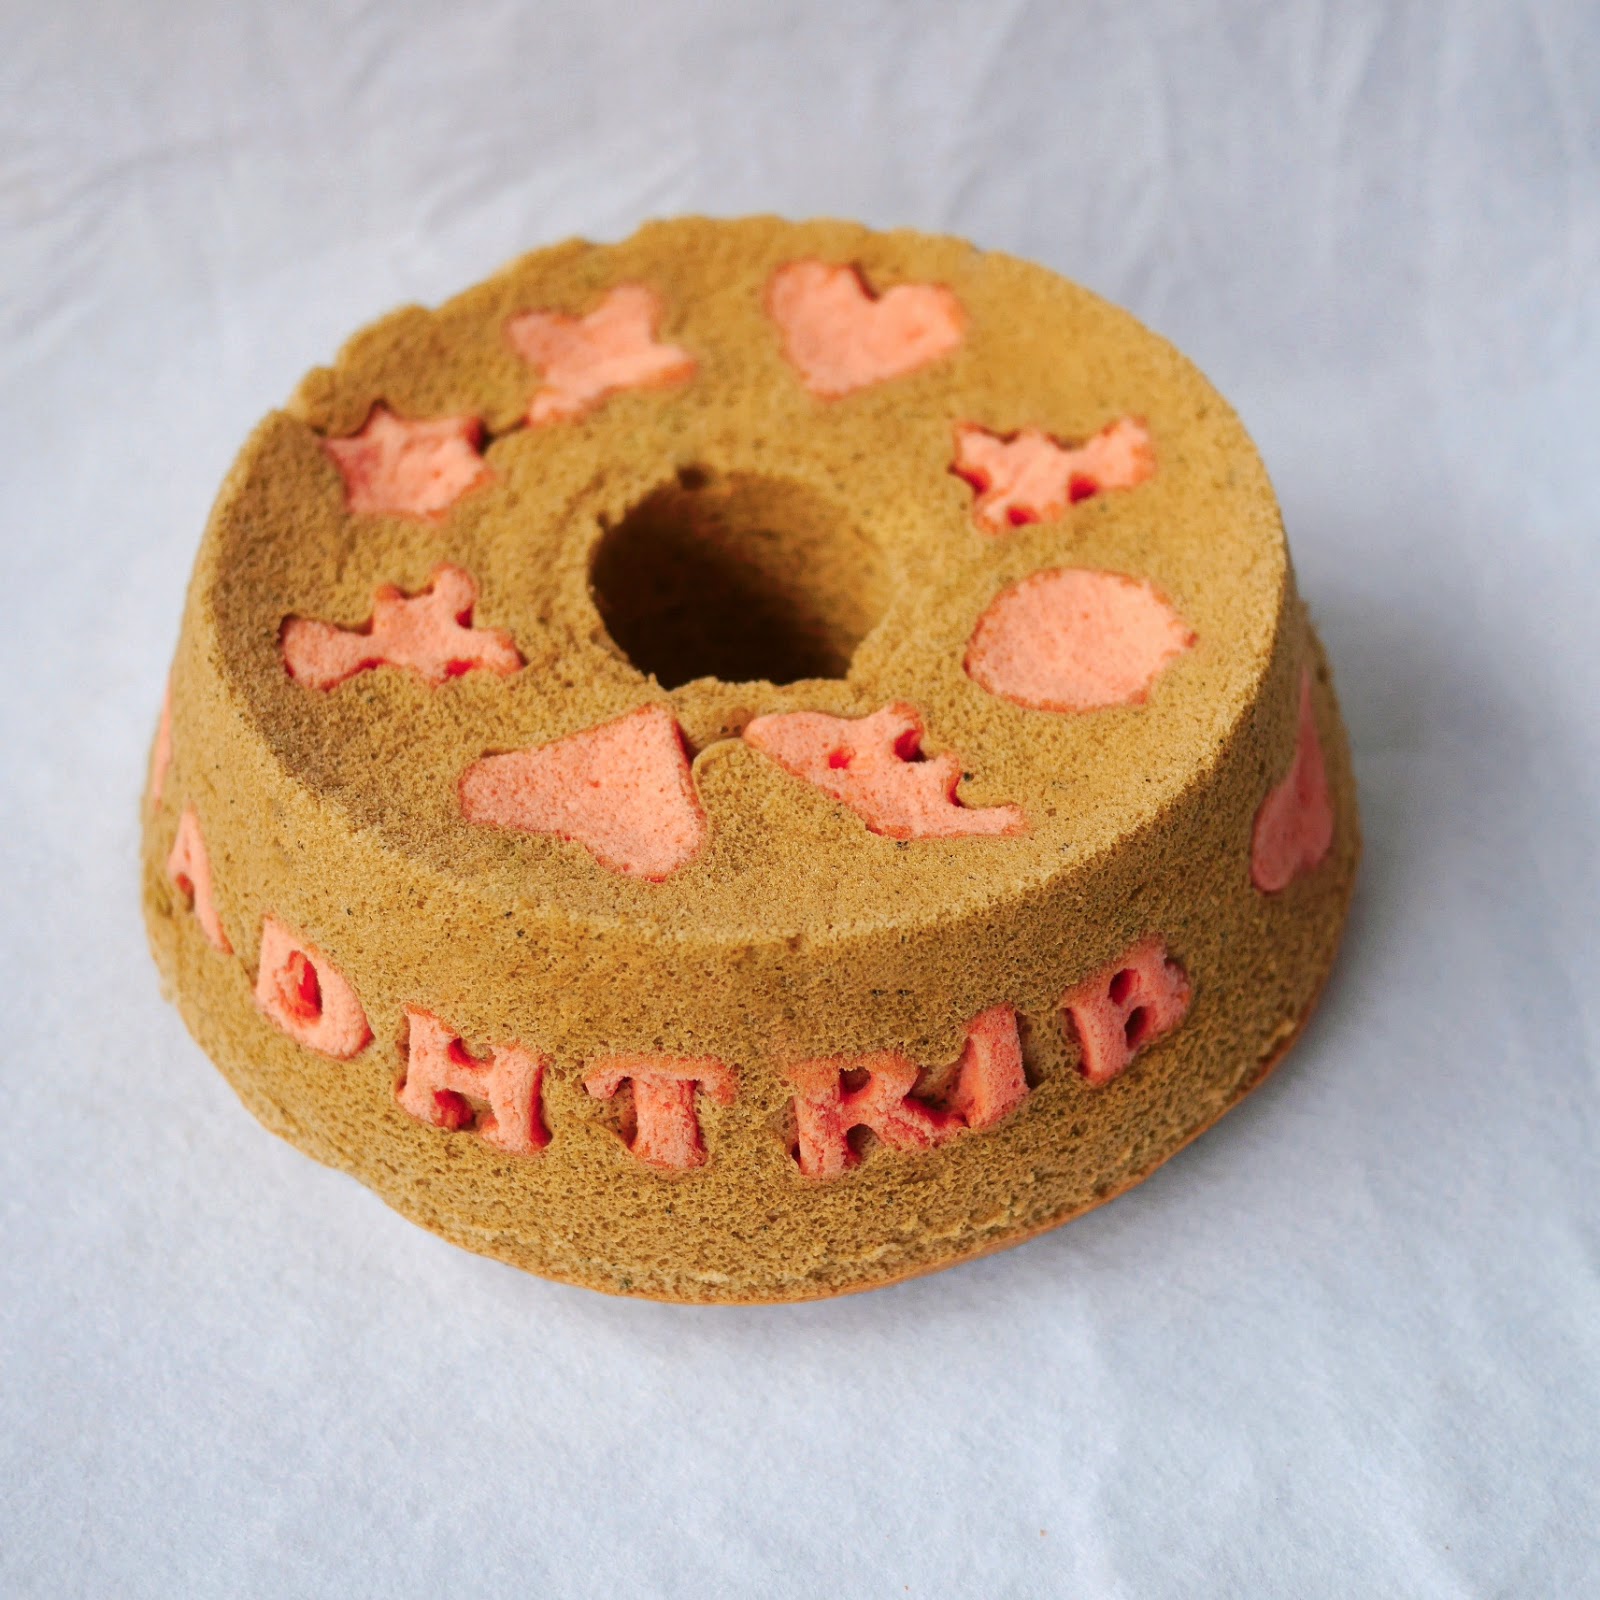 Green Tea Strawberry Chiffon Cake with Words & Shapes